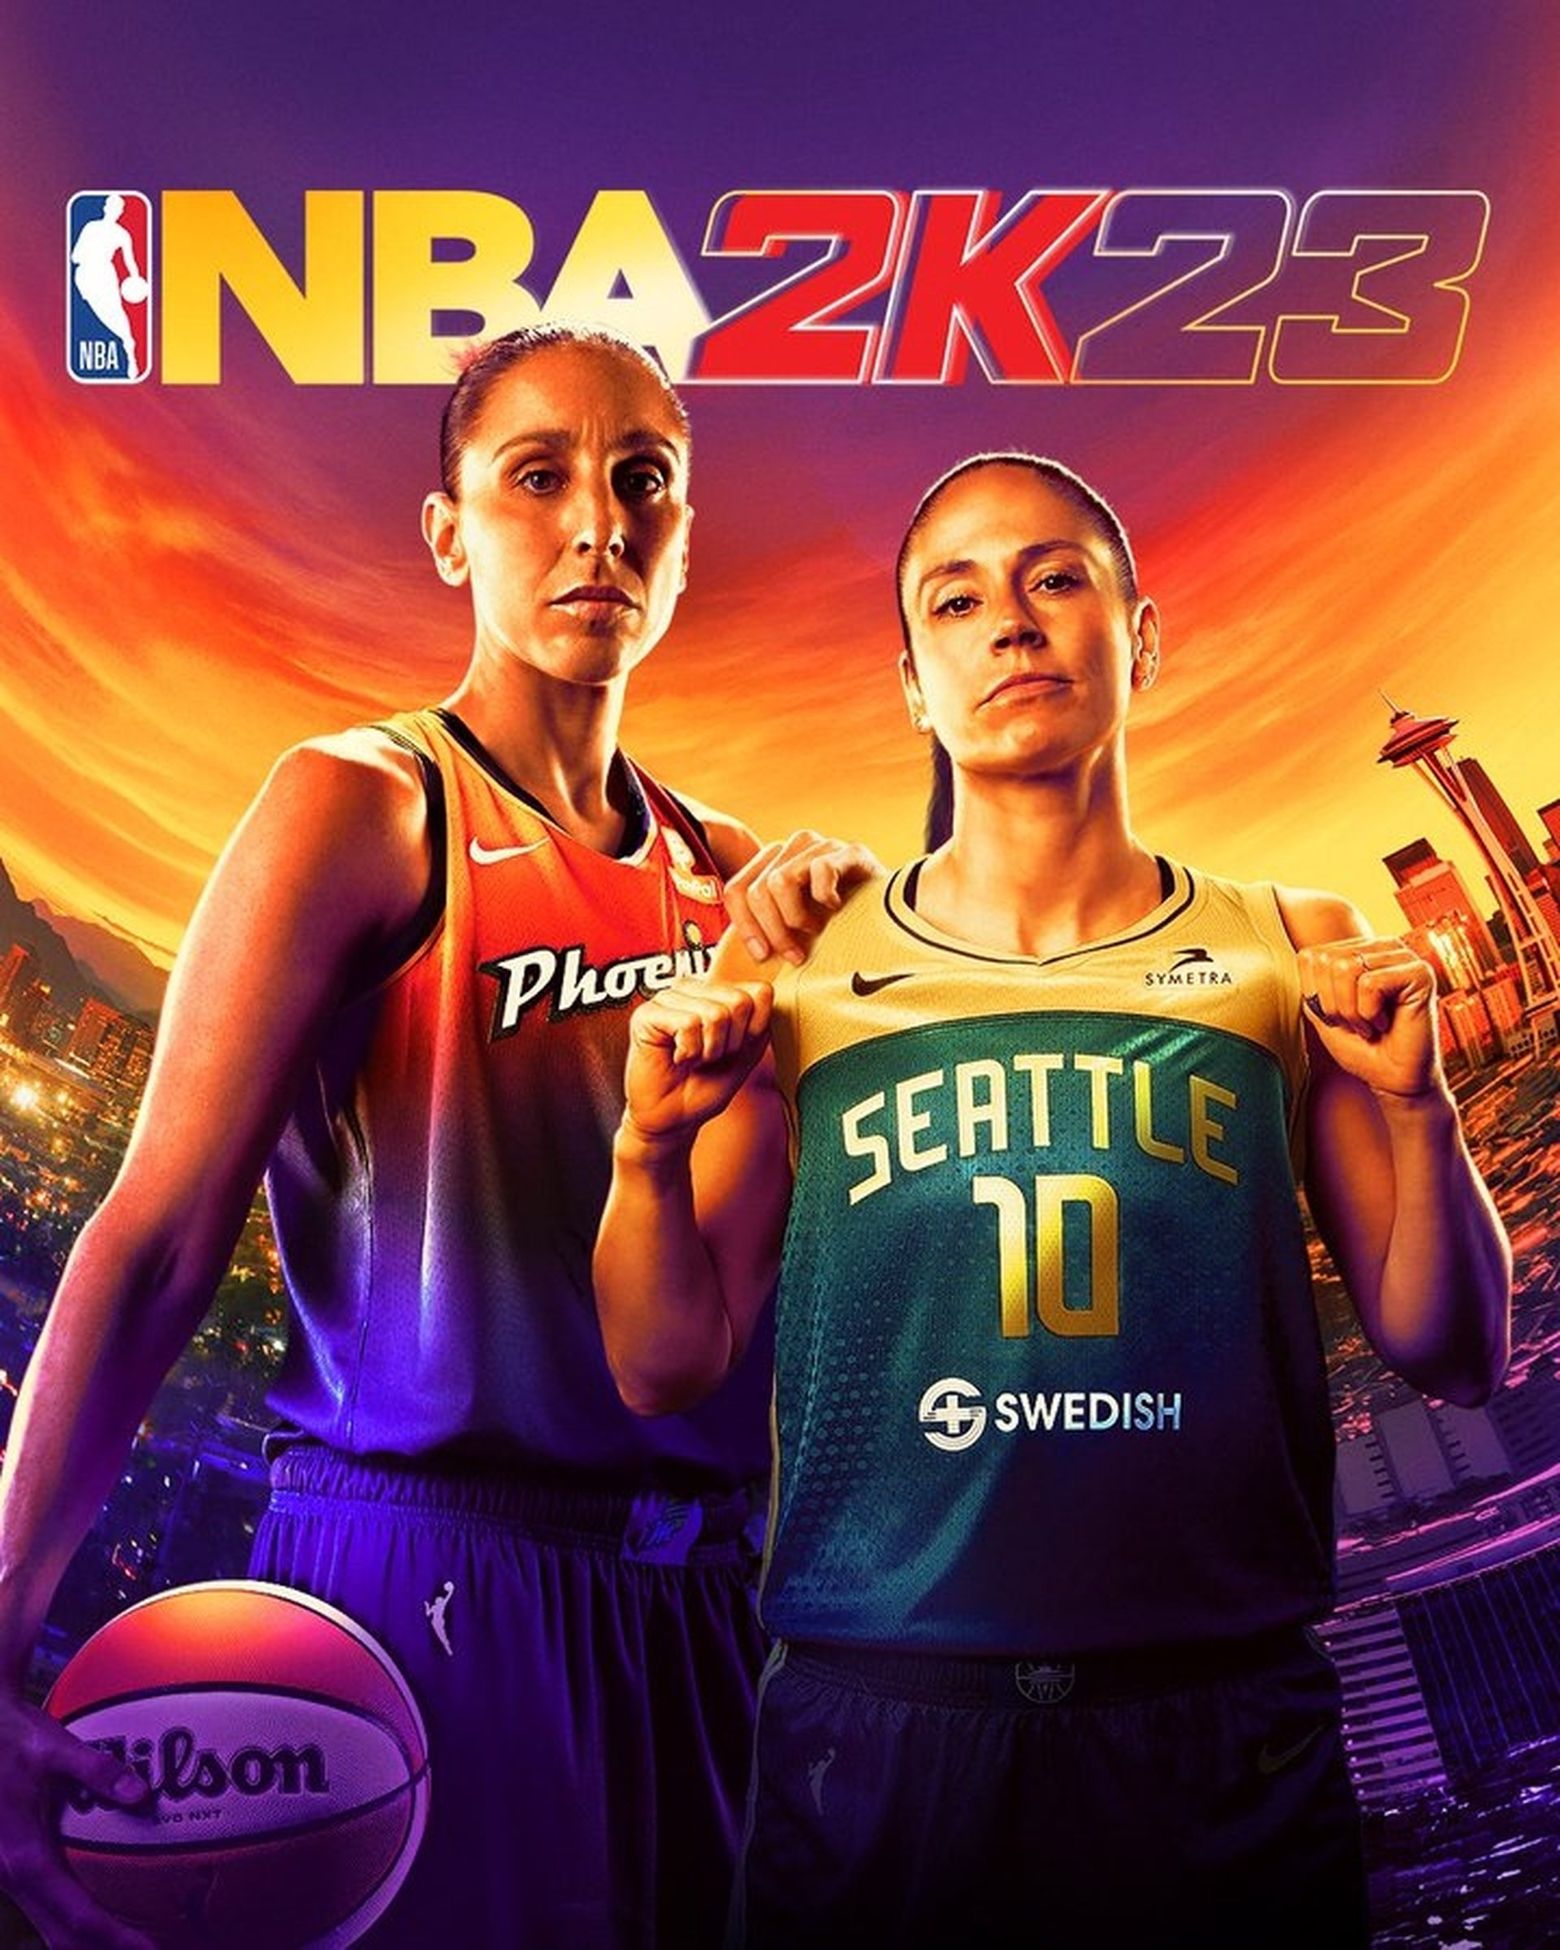 Candace Parker becomes first WNBA player on the cover of NBA 2K